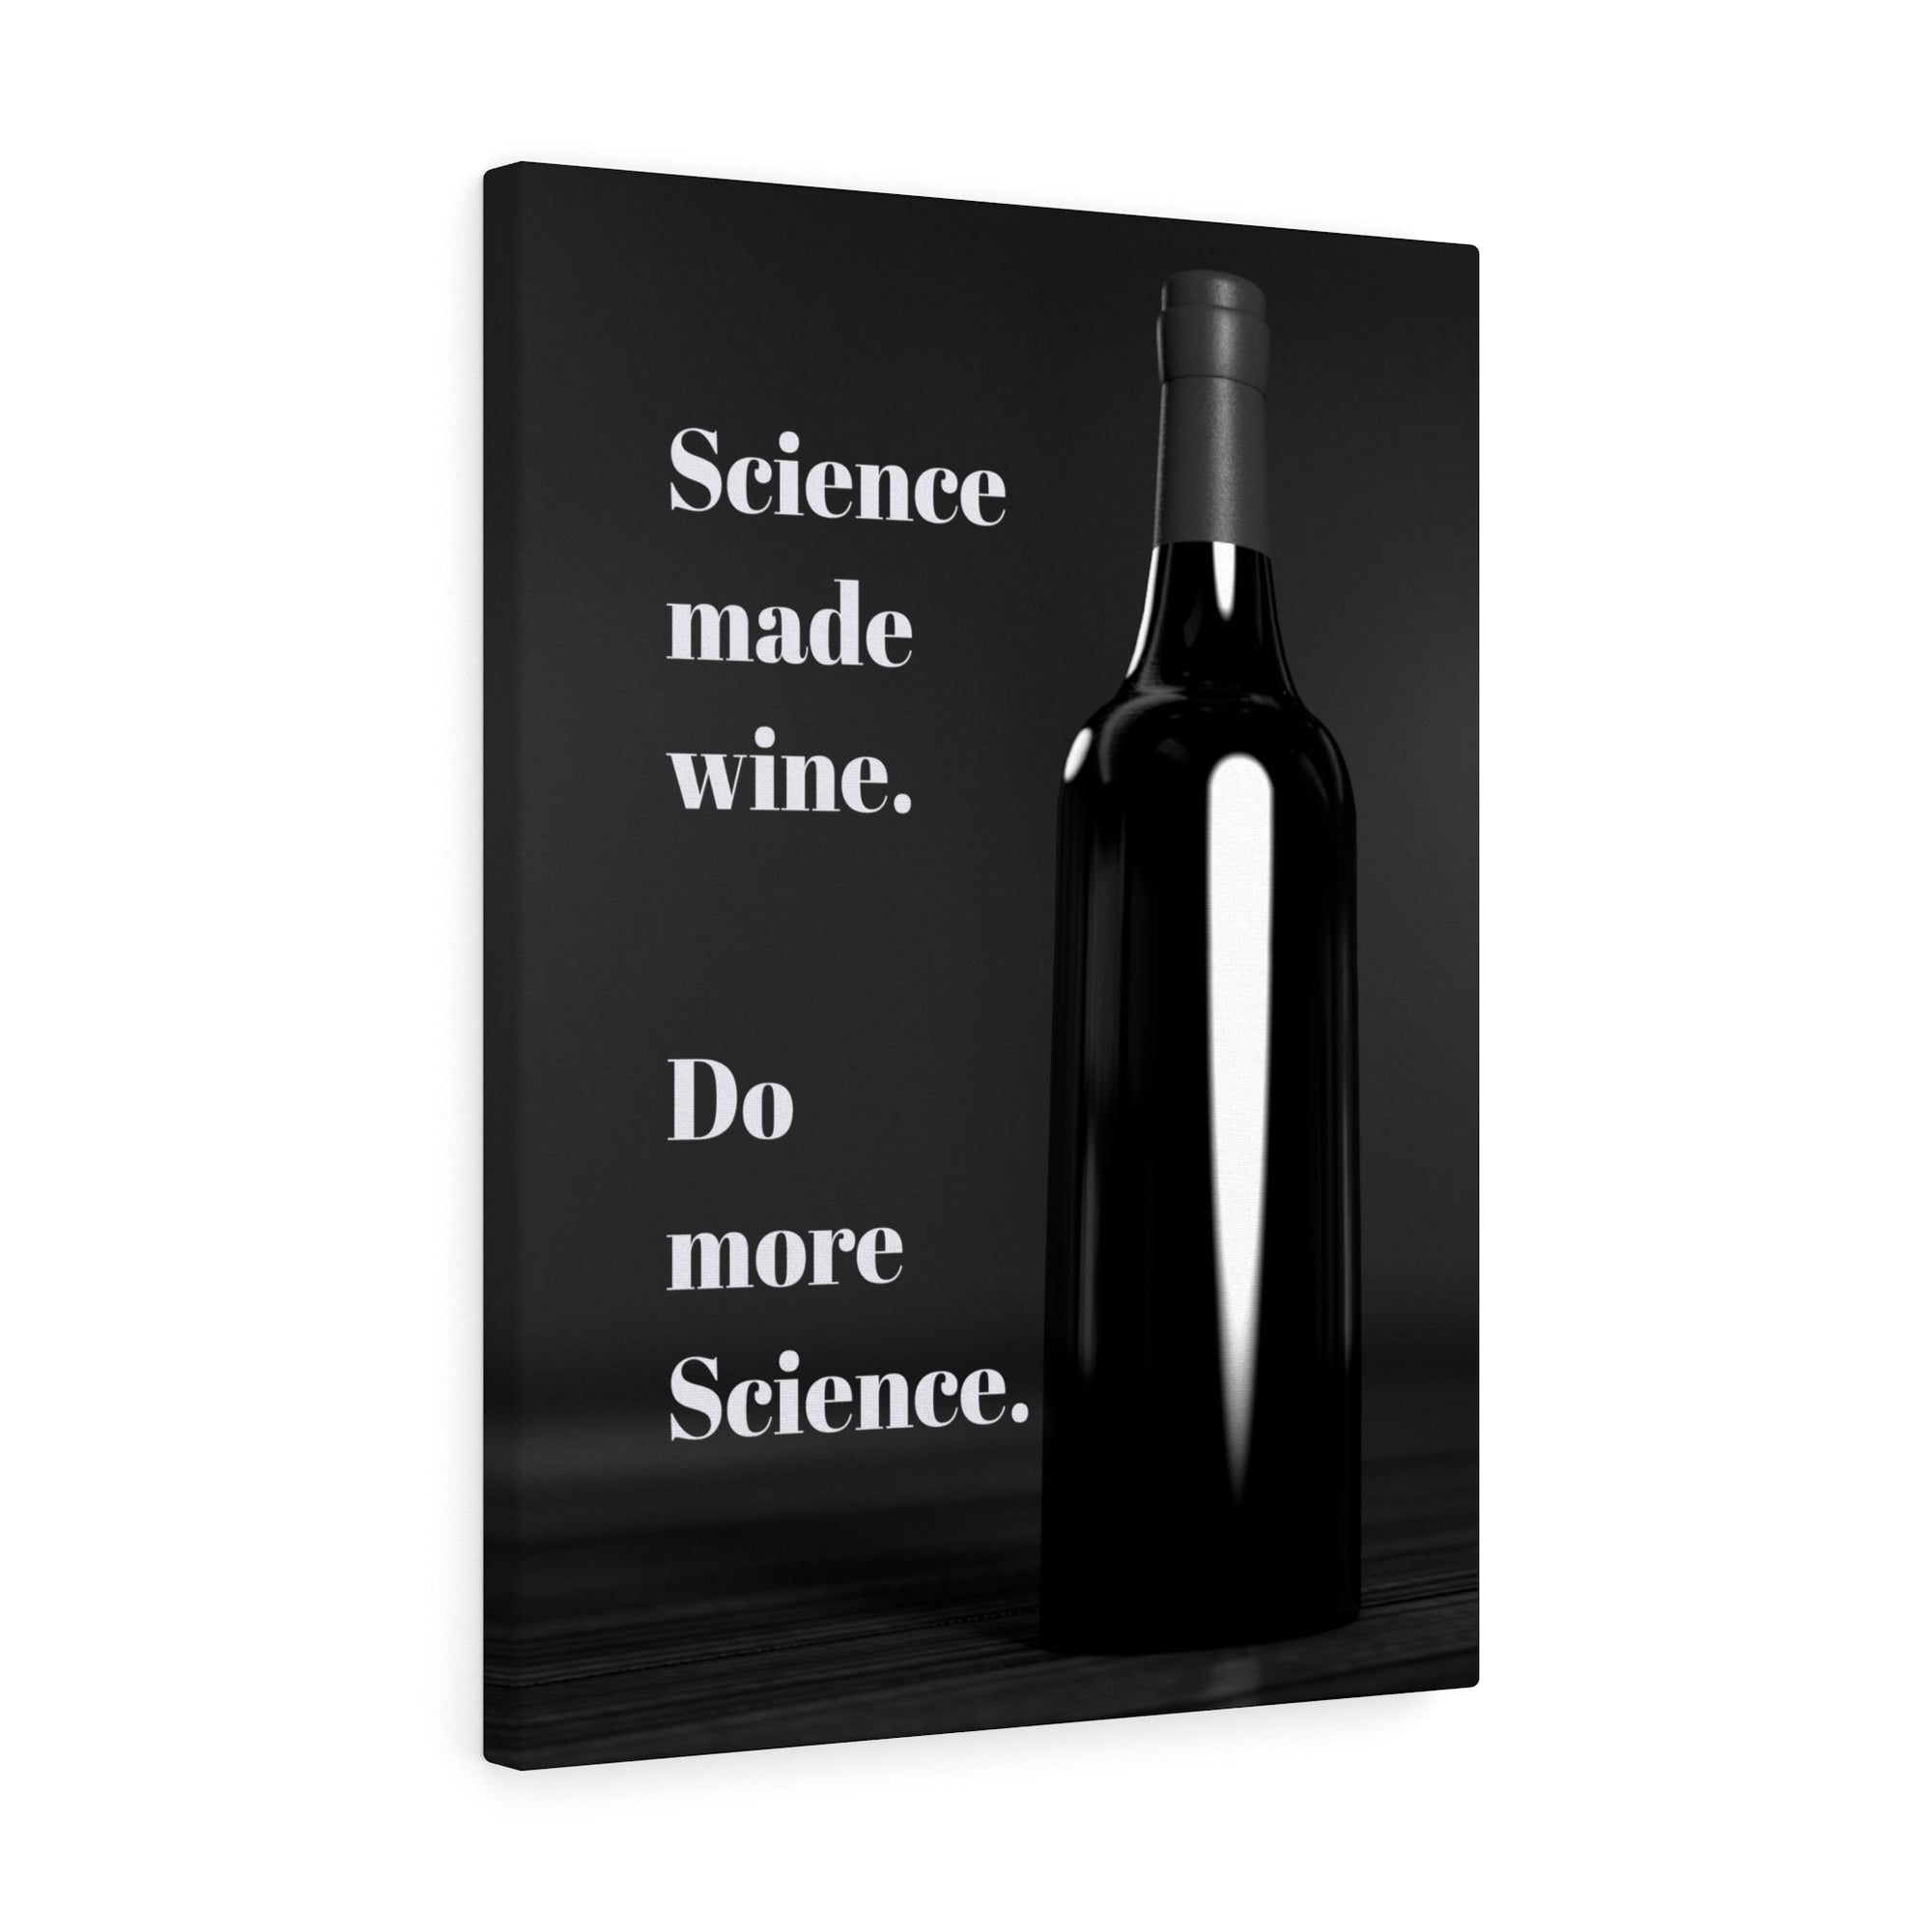 Science made wine. Do more science canvas wrap print